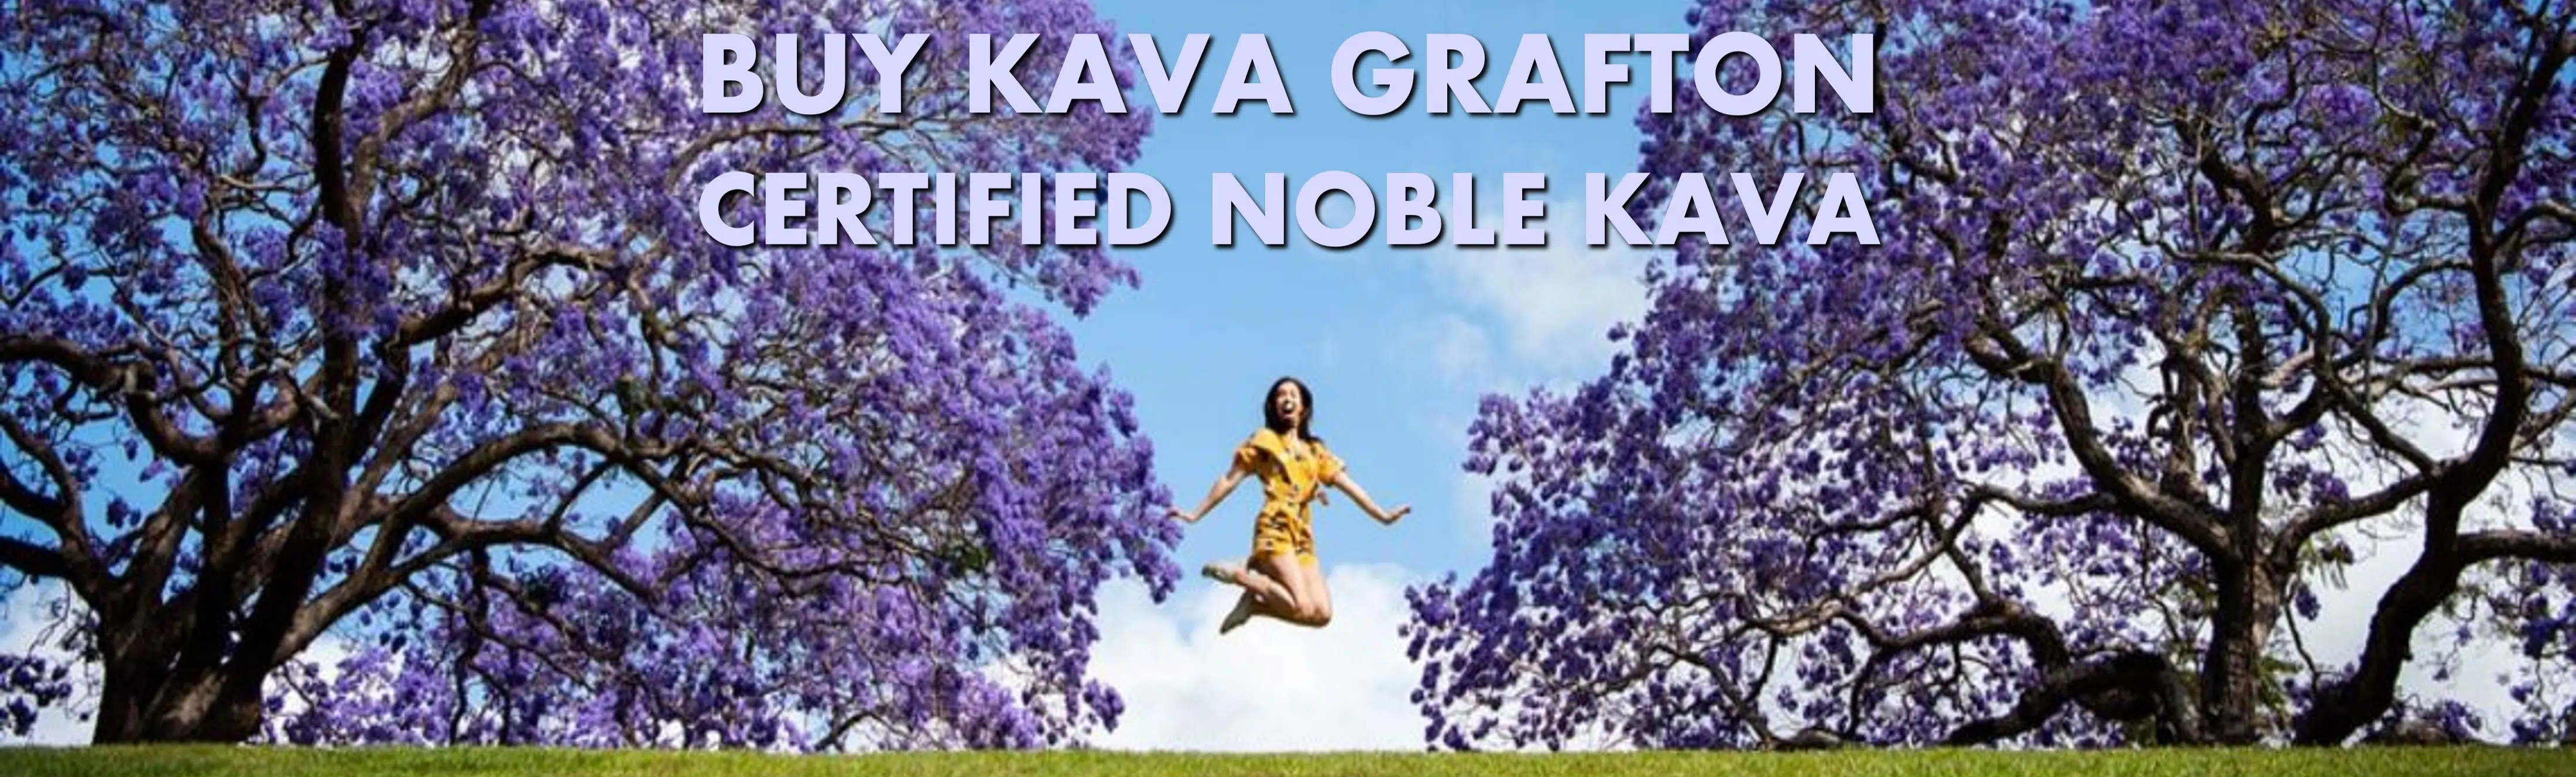 Woman jumping for joy between two jacaranda trees in Grafton New South Wales with caption Buy Kava Grafton Certified Noble Kava